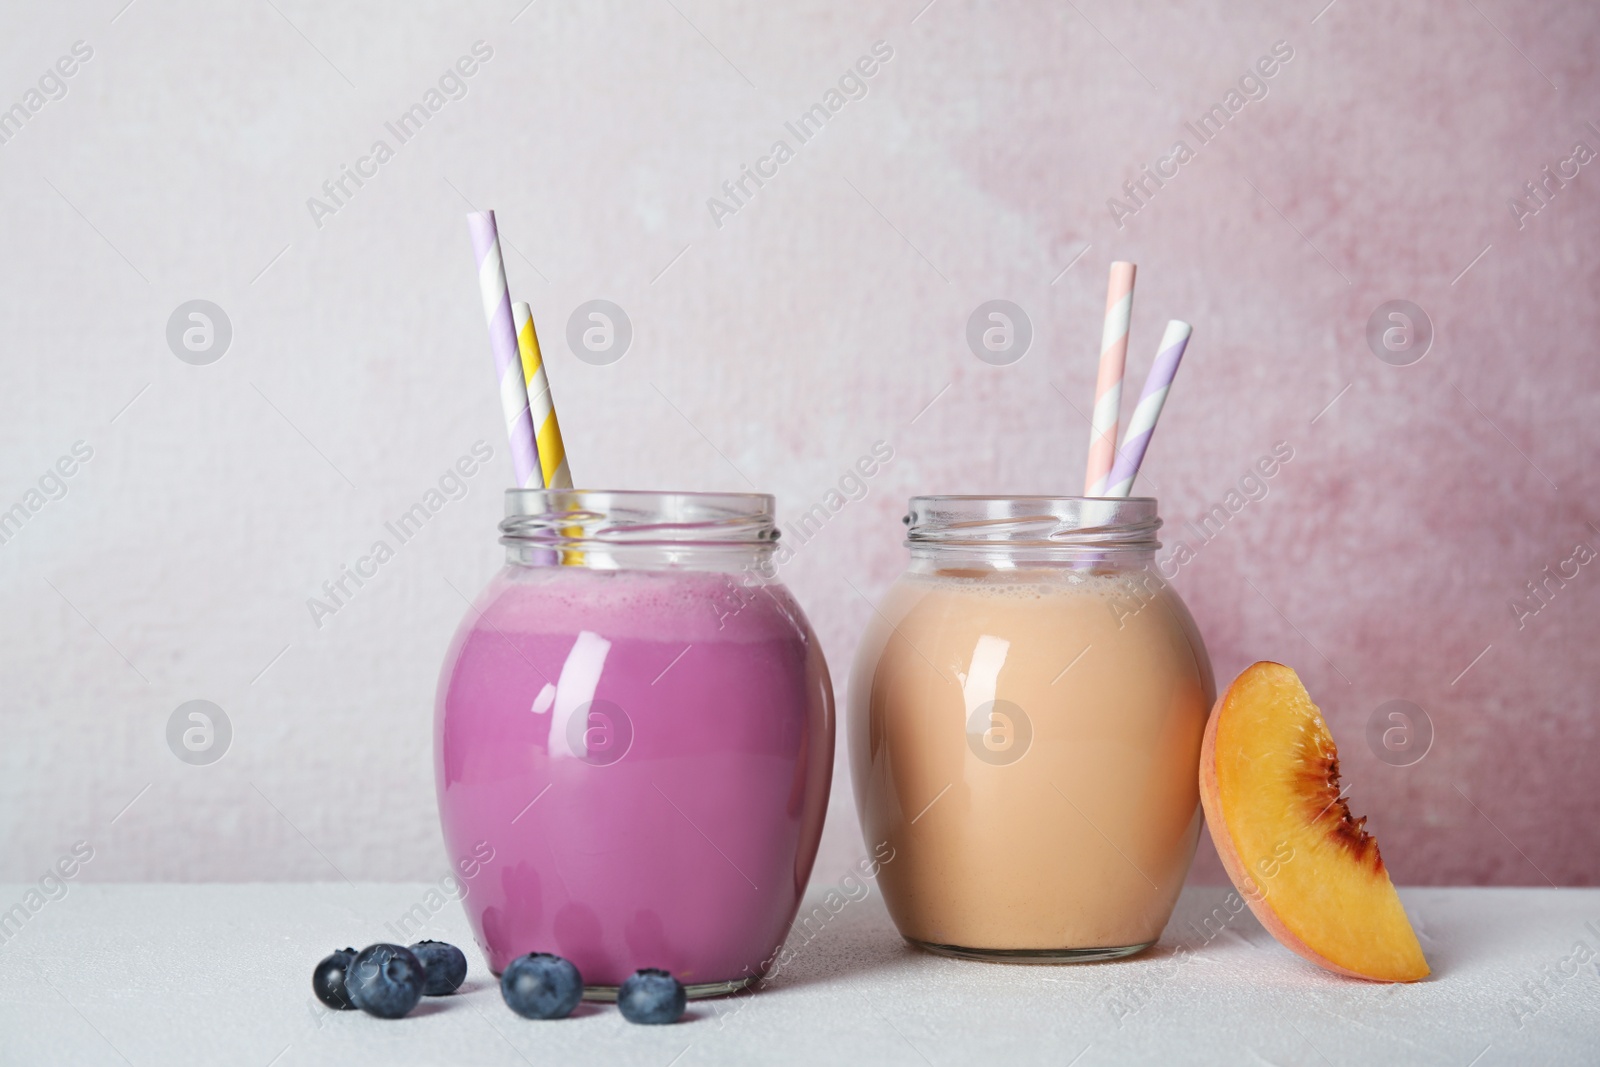 Photo of Jars of tasty milk shakes and fresh fruits on table